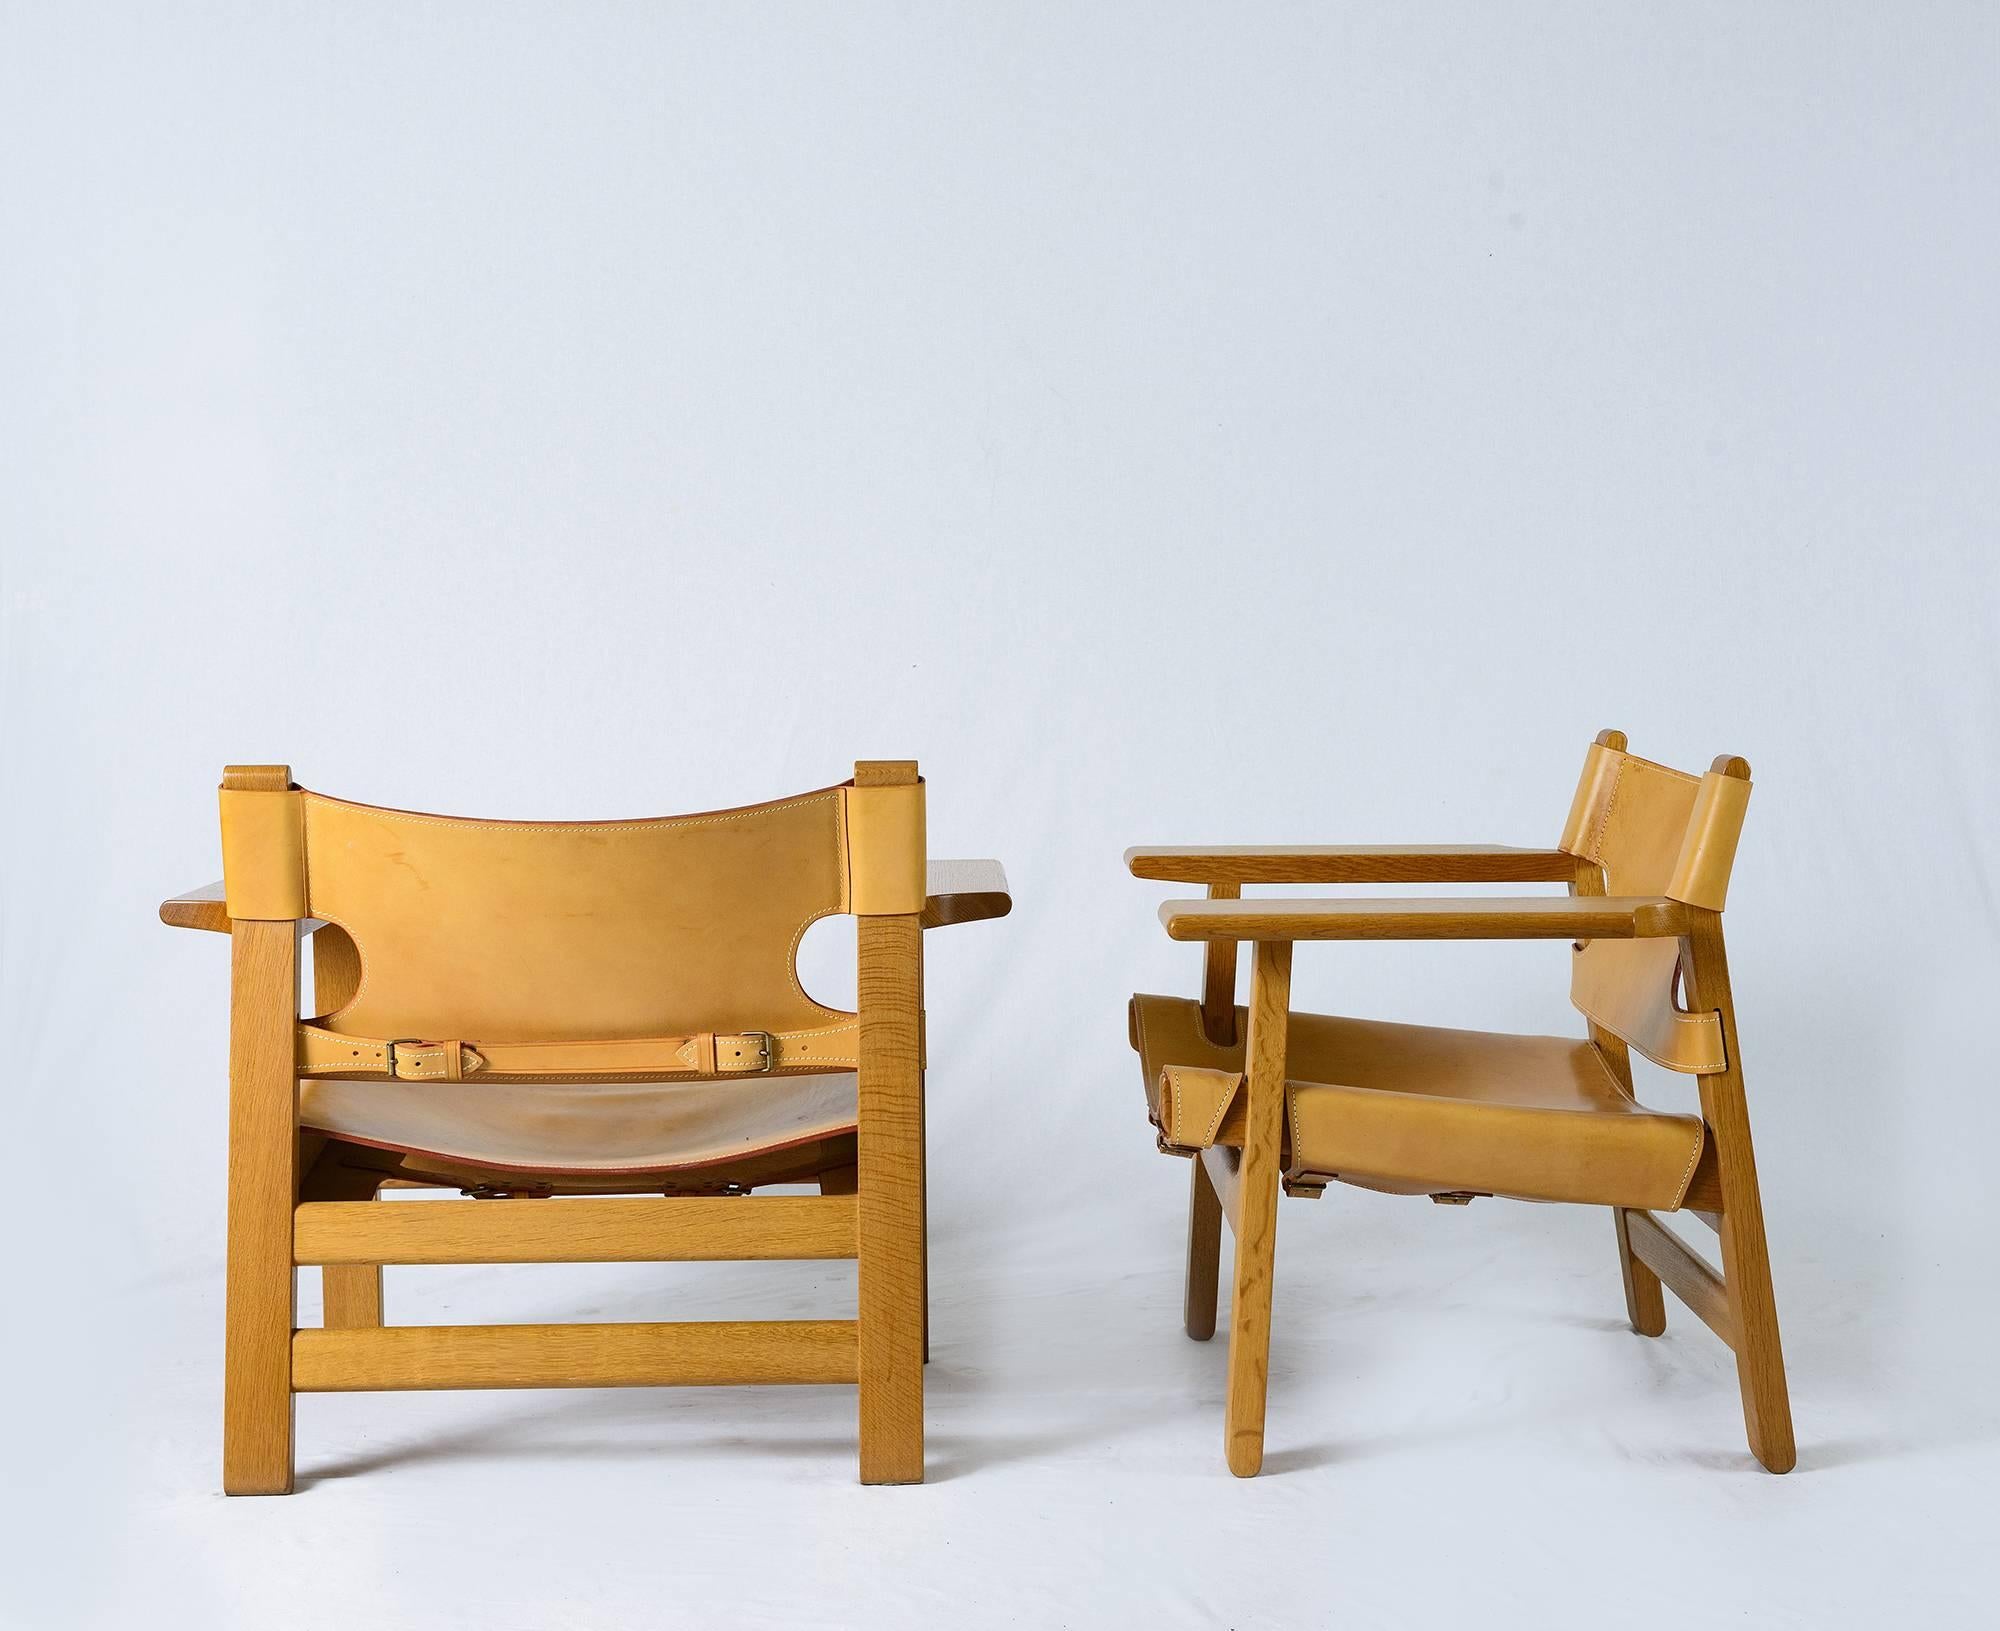 Pair of Børge Mogensen "Spanish" chairs designed in 1958 and produced by Fredericia Stolefabrik. Mogensen was inspired by a Spanish military commander's chair.